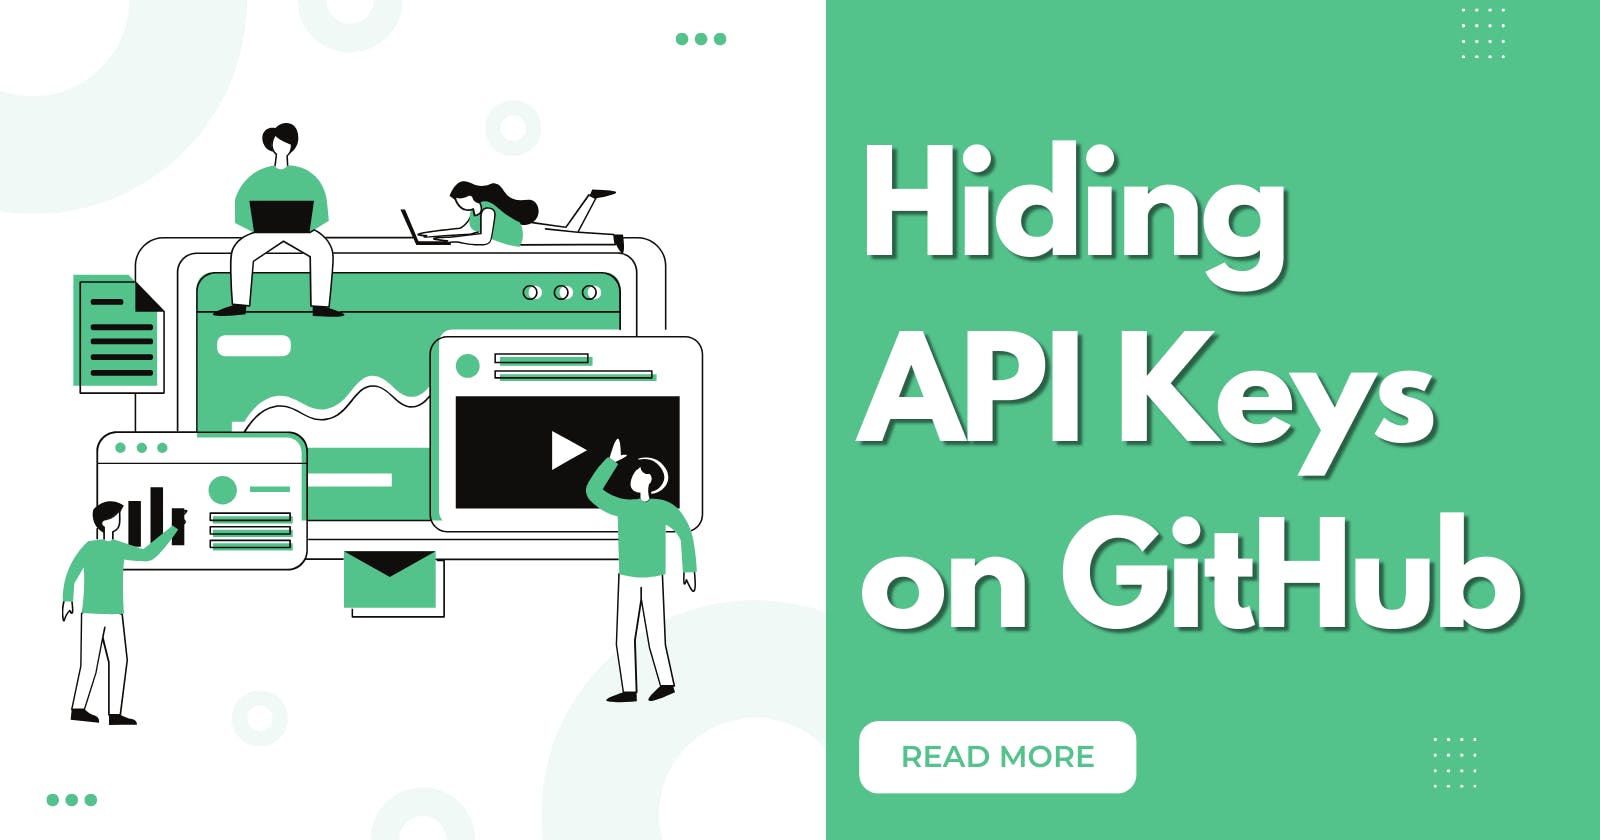 Protecting Your Android Project: Best Practices for Hiding API Keys on GitHub